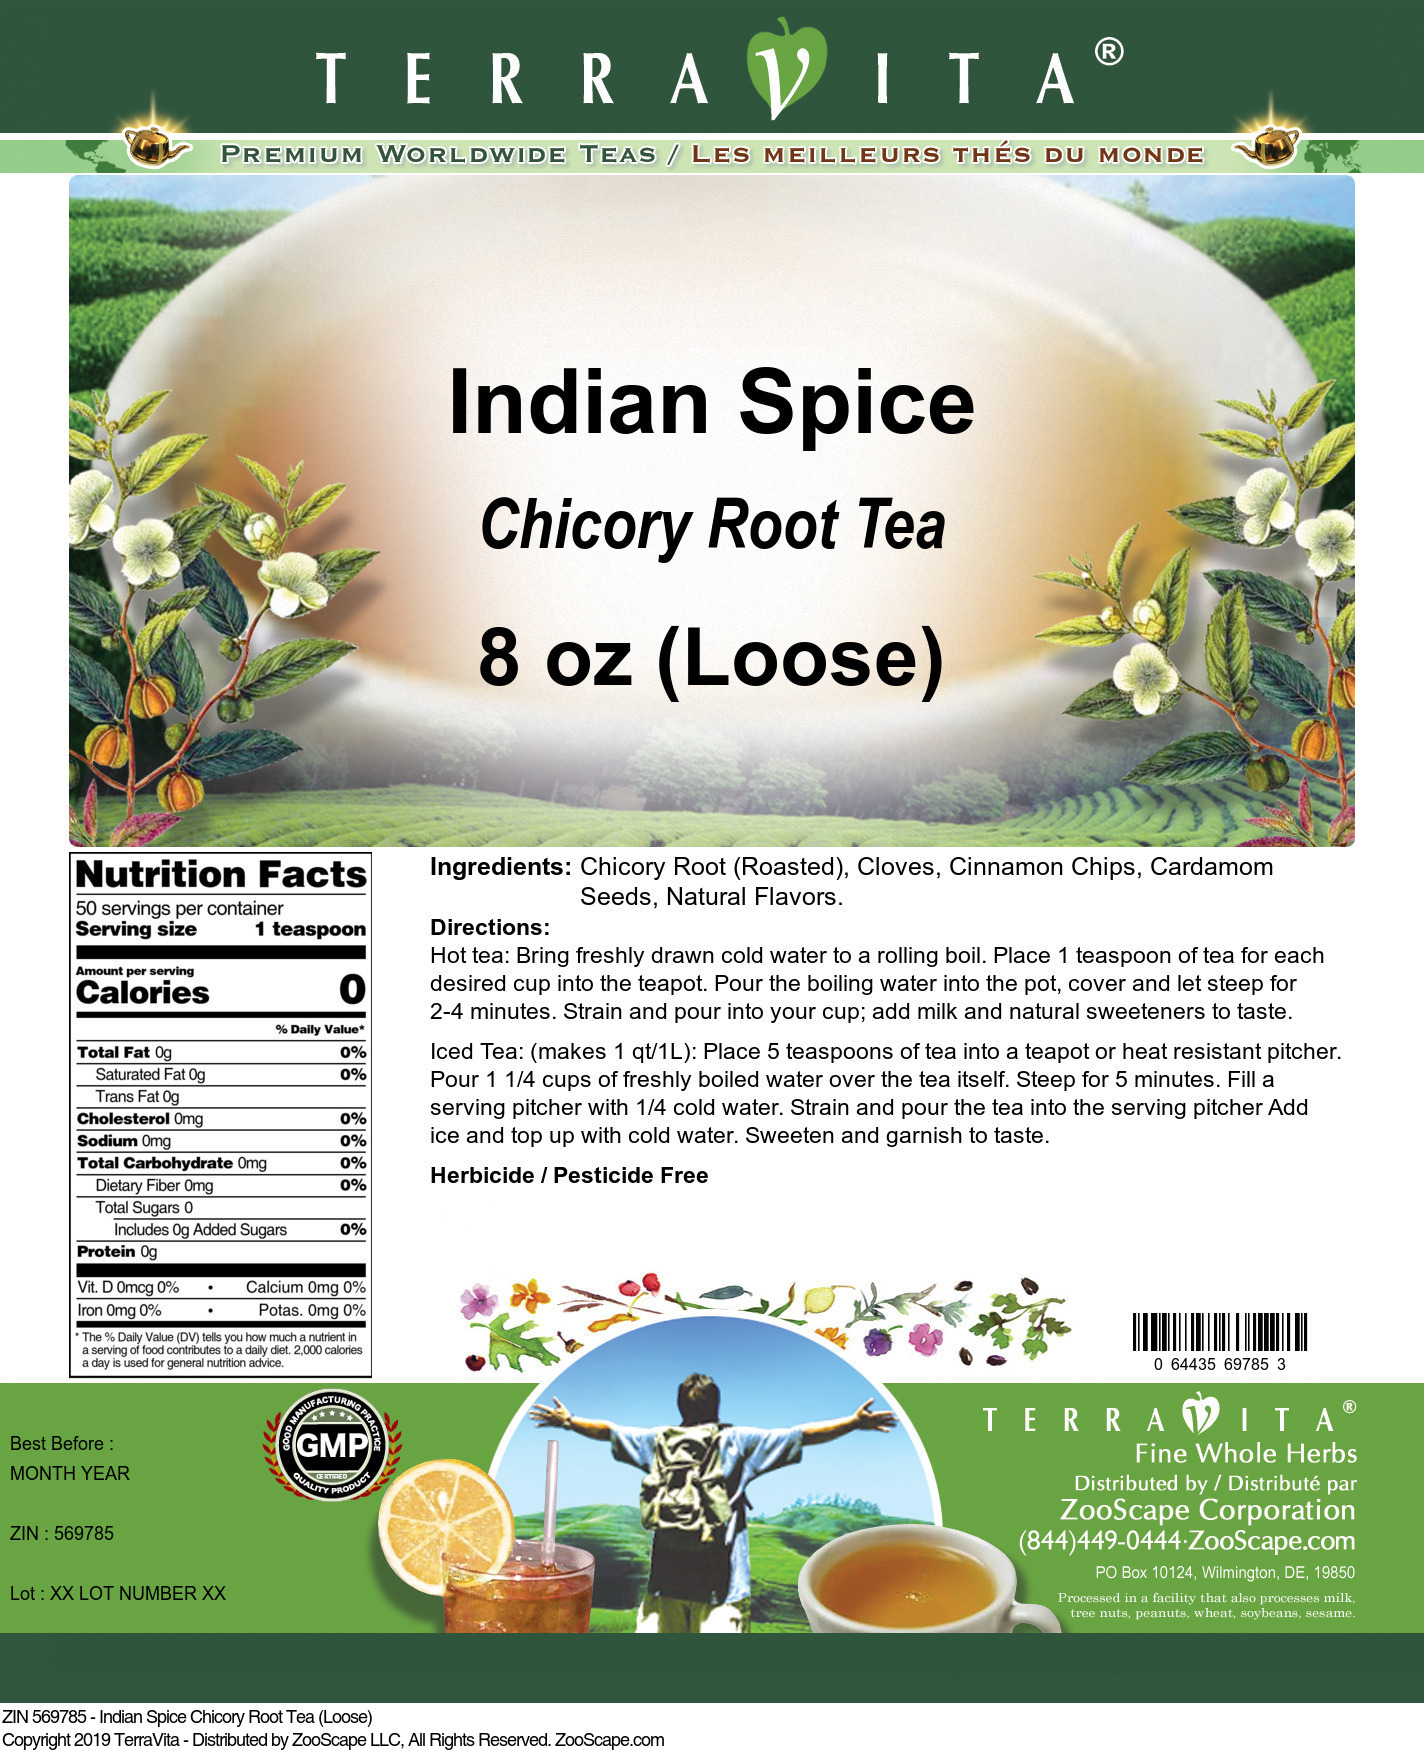 Indian Spice Chicory Root Tea (Loose) - Label